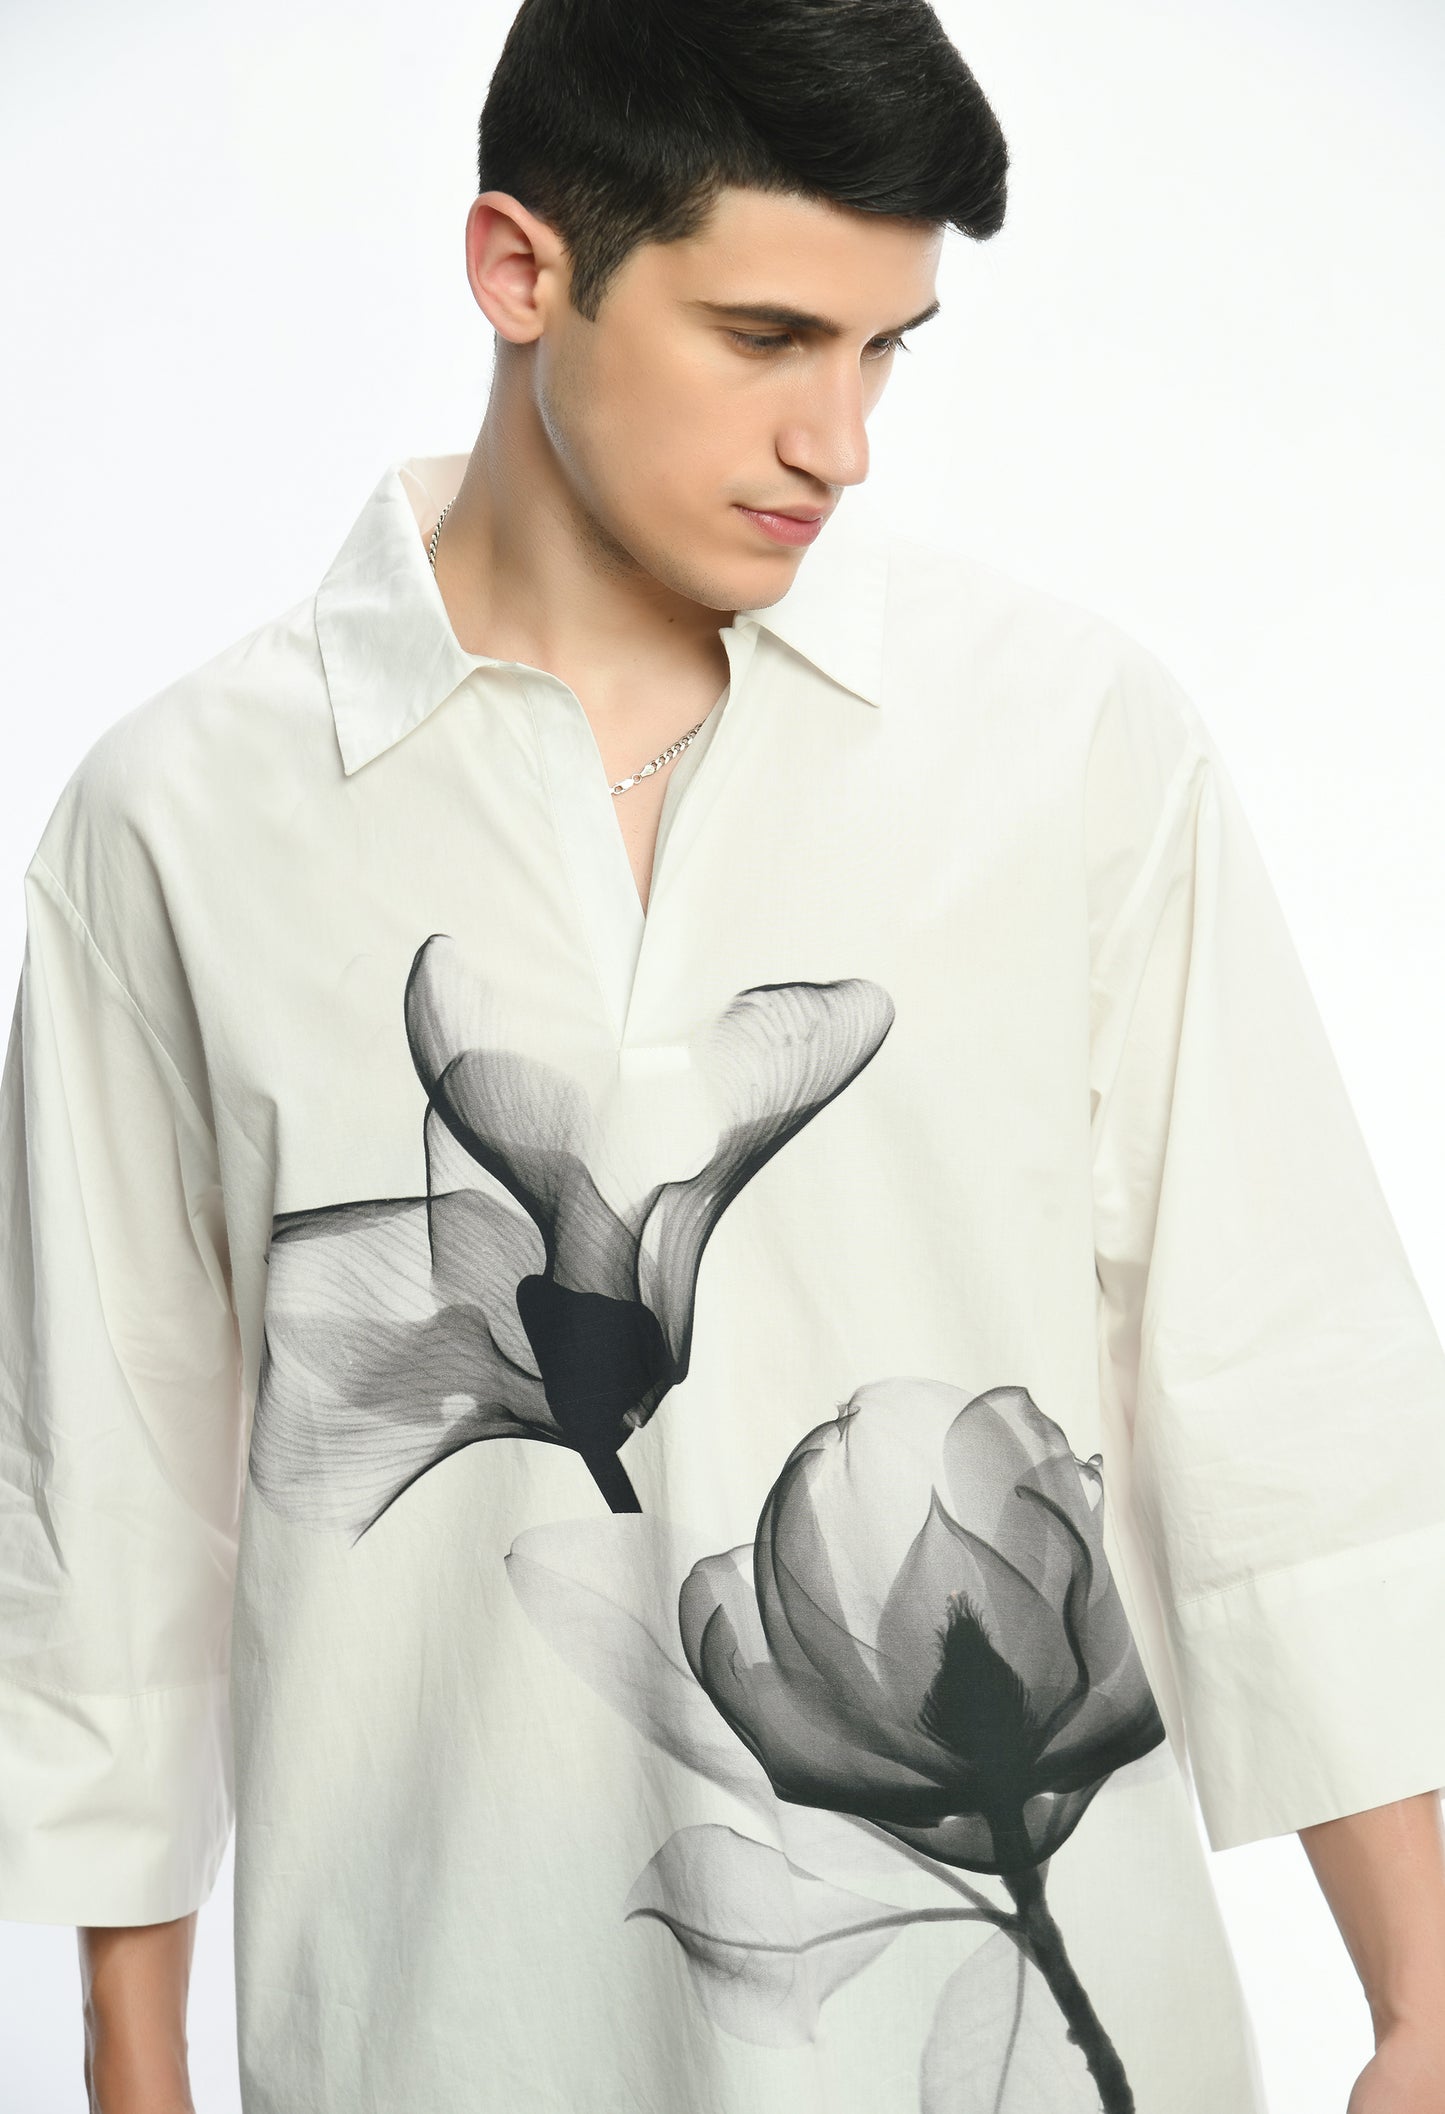 White, stylish, lose-fit, cotton shirt with digital print on it.